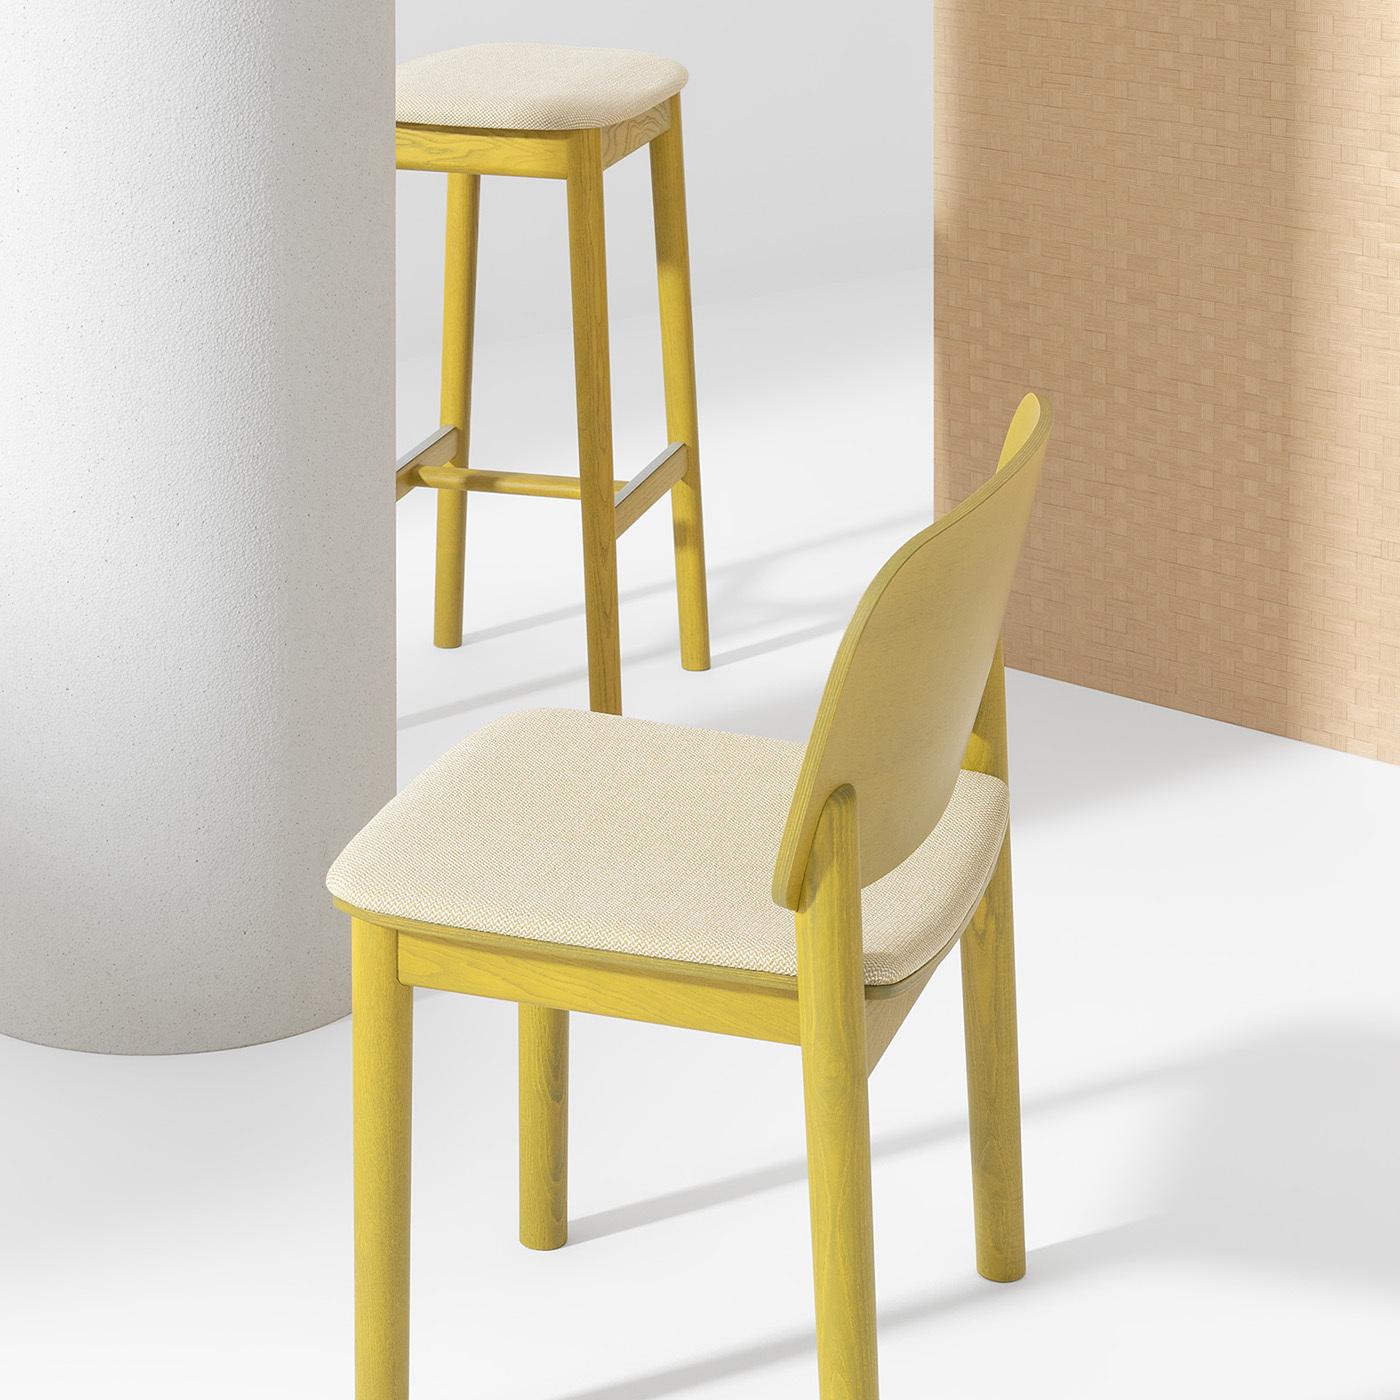 This fine chair designed by Harri Koskinen emphasizes the charm of formal simplicity with a harmonious choice of chromatic tones. Top-rate ash lacquered in a vibrant curry tone is used to craft the unadorned frame, which includes the open, slightly